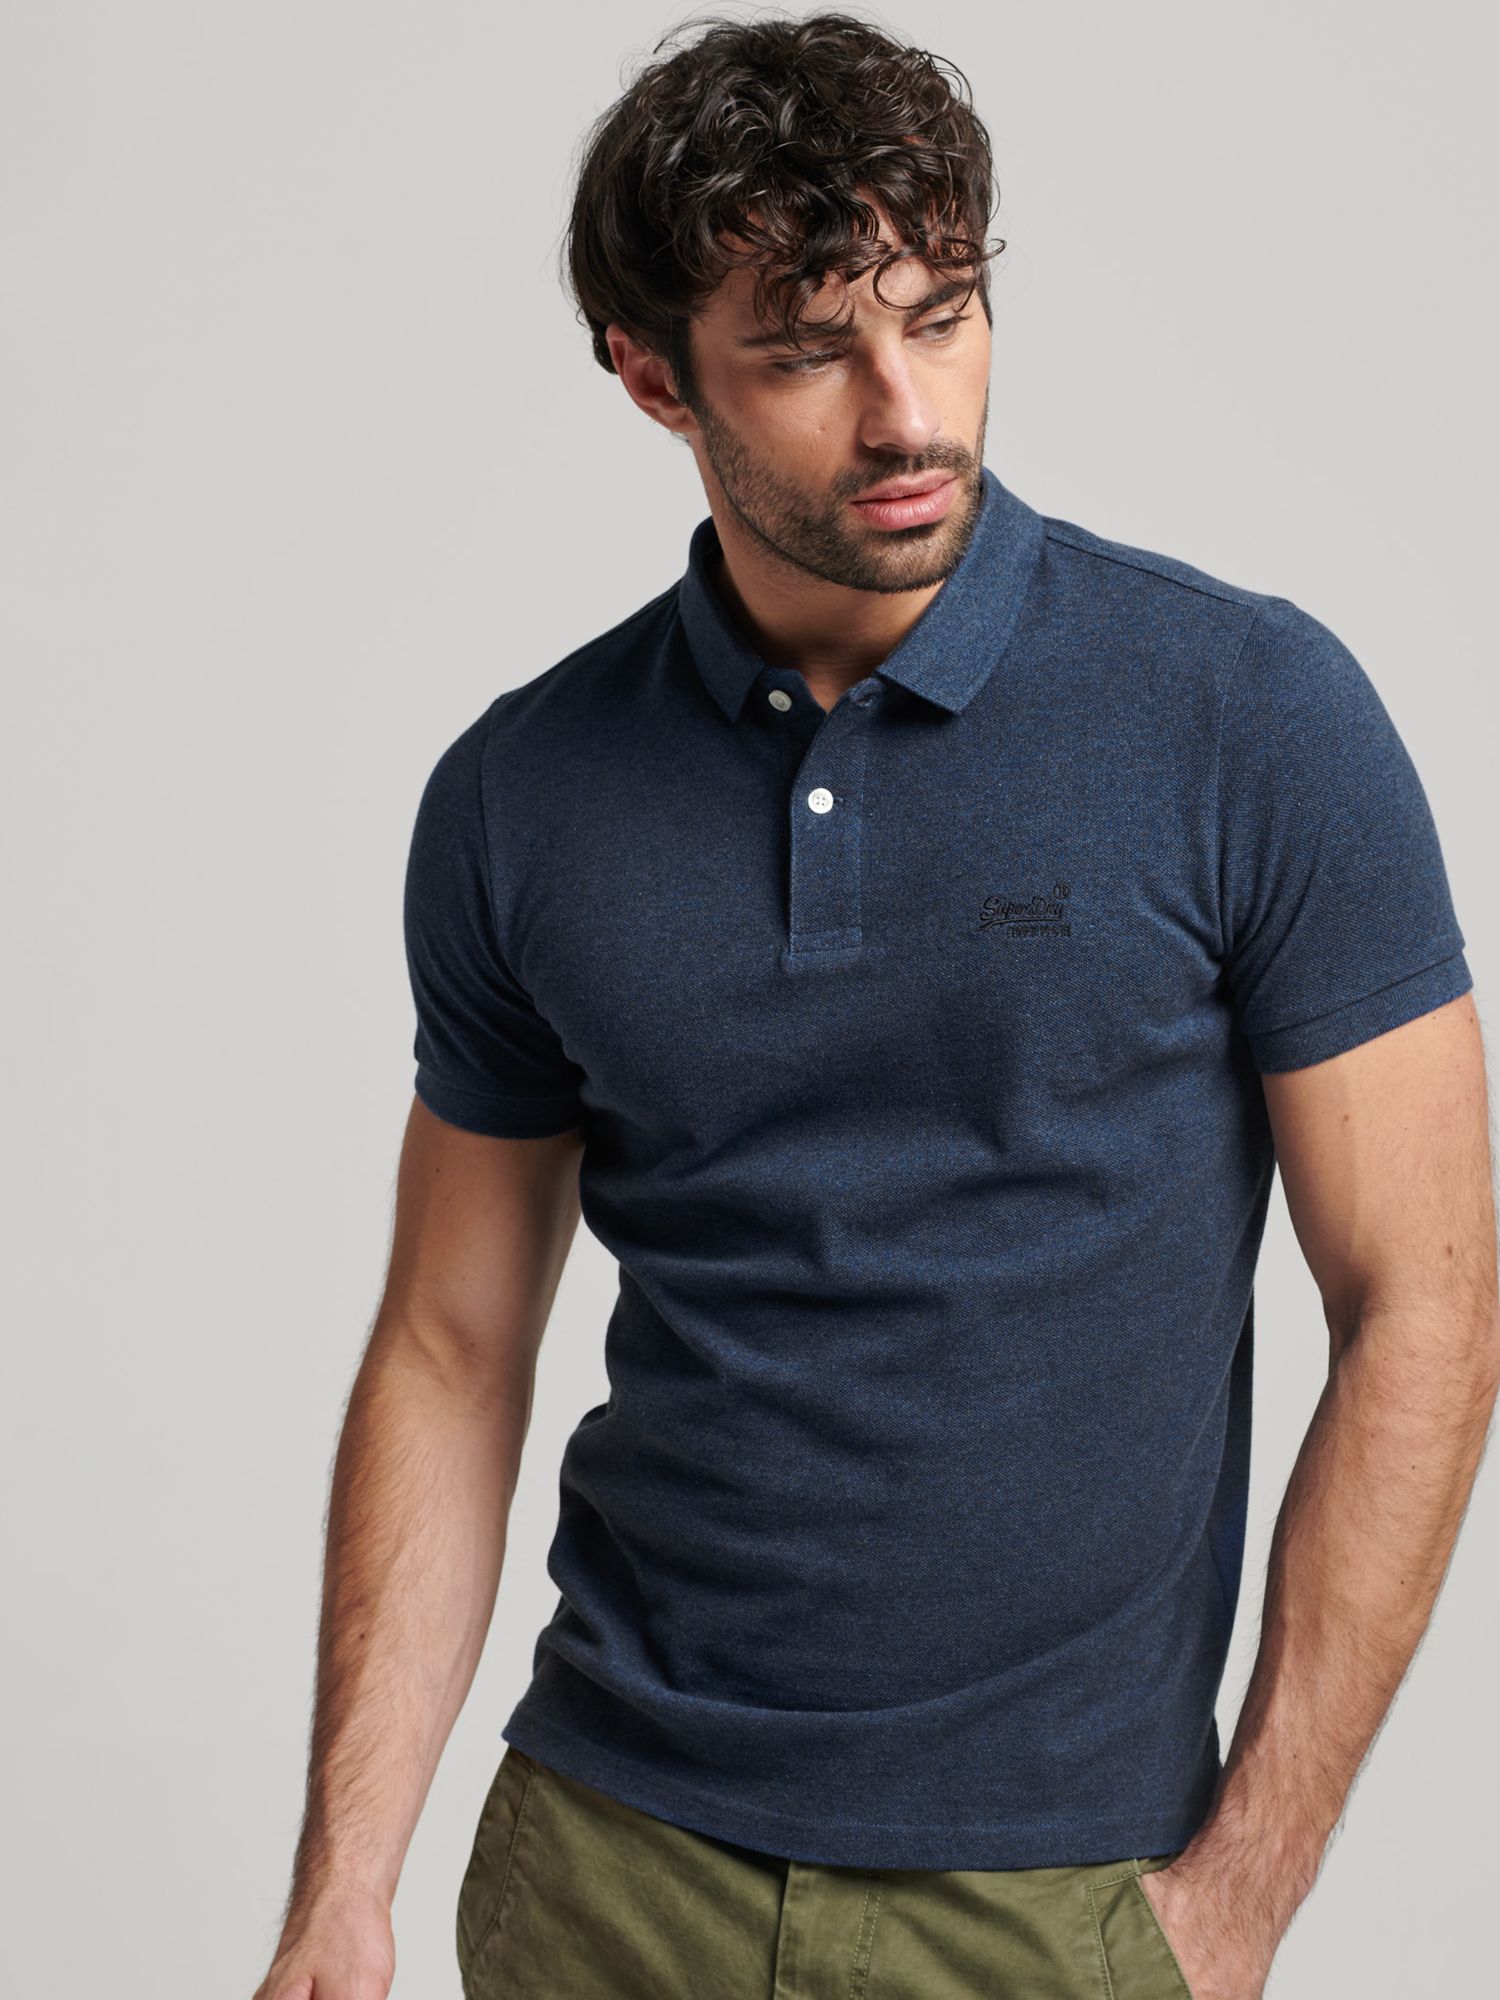 Superdry Classic Pique Polo Lewis Shirt, Blue Partners Bright at & John Marl